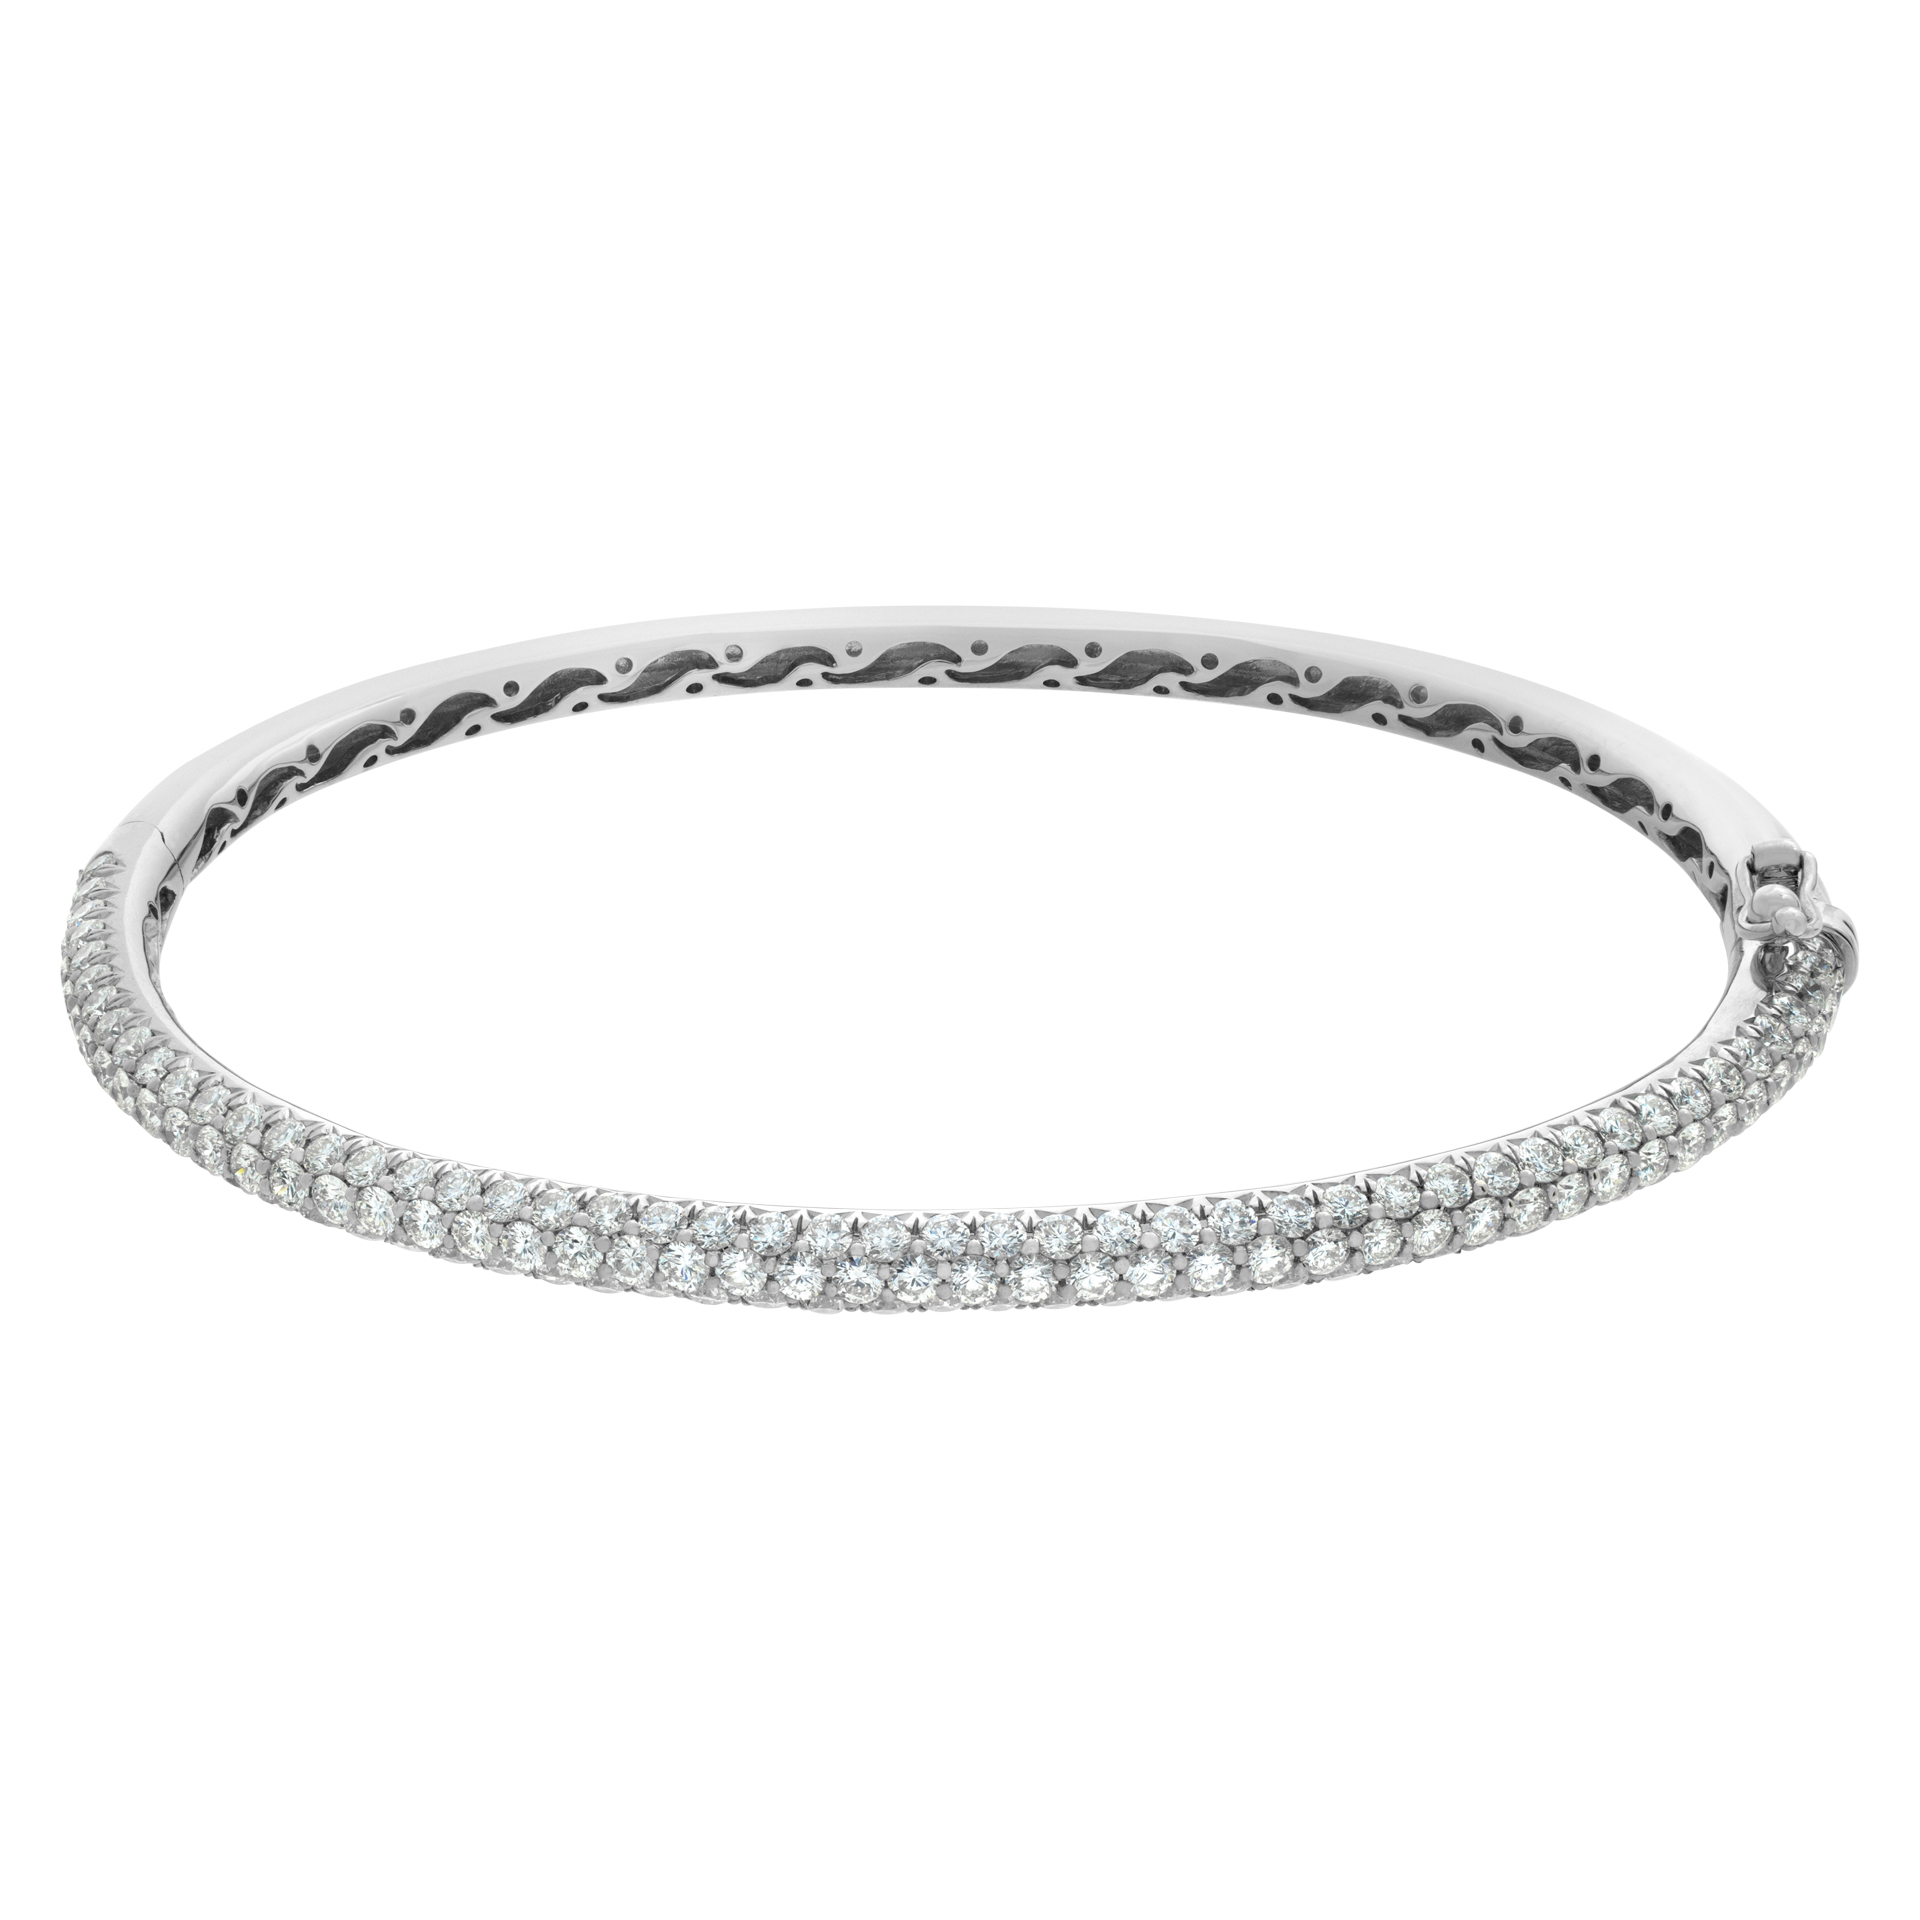 18k white gold bangle with 2.86 carats in round brilliant cut pave diamonds